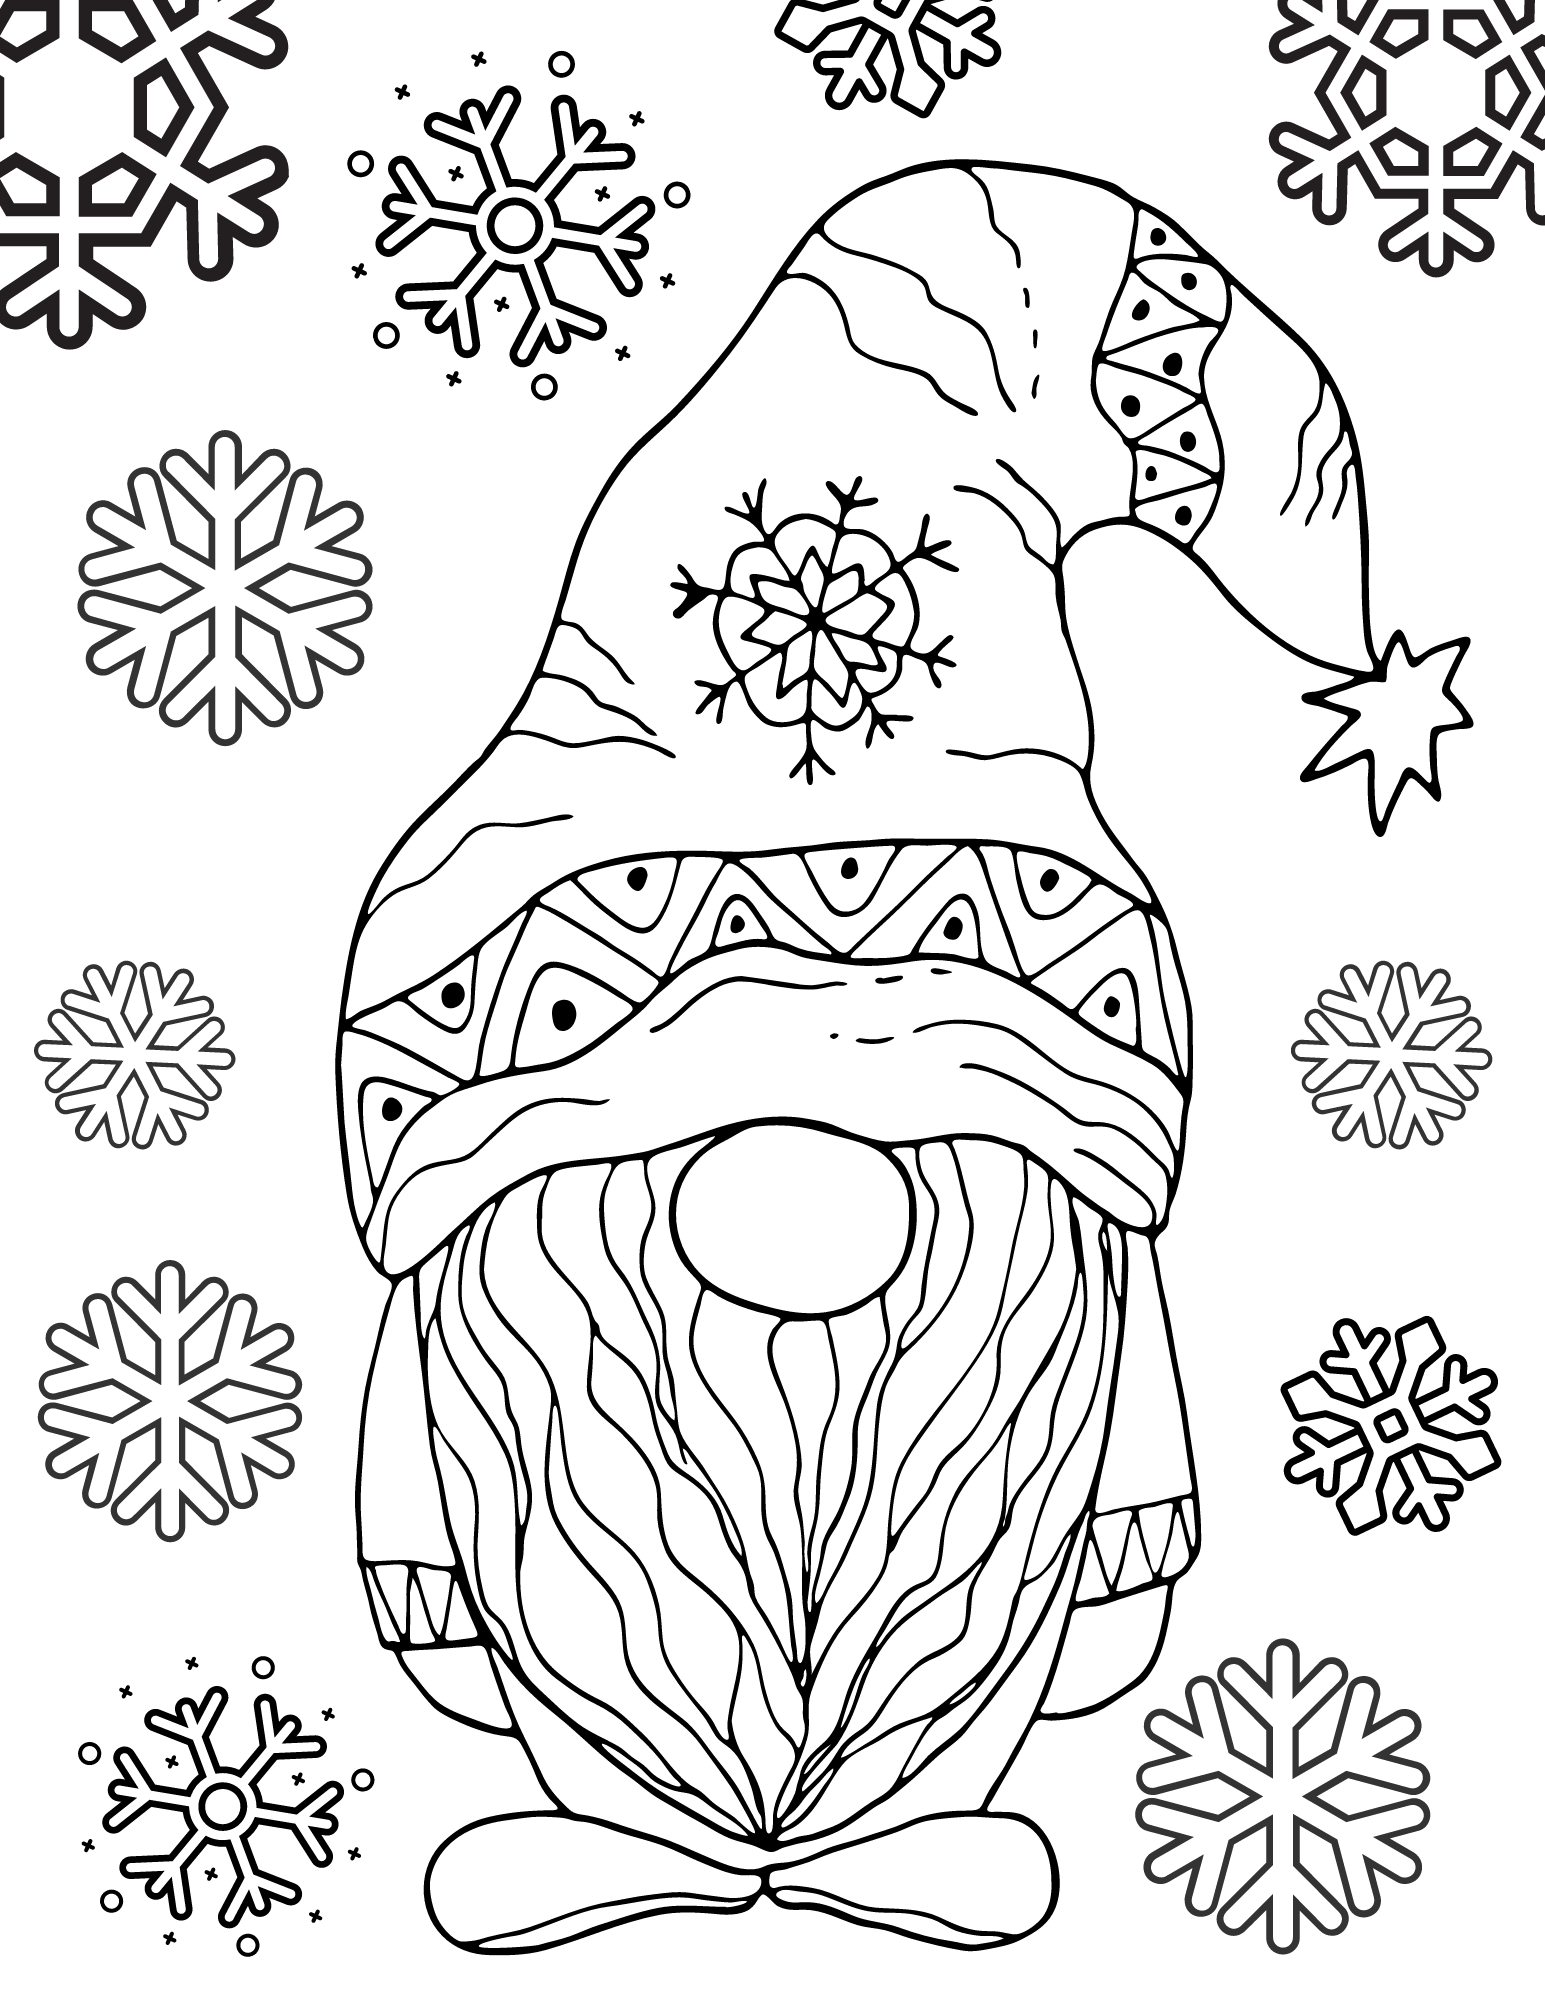 Winter Adult Coloring Pages  Woo! Jr. Kids Activities